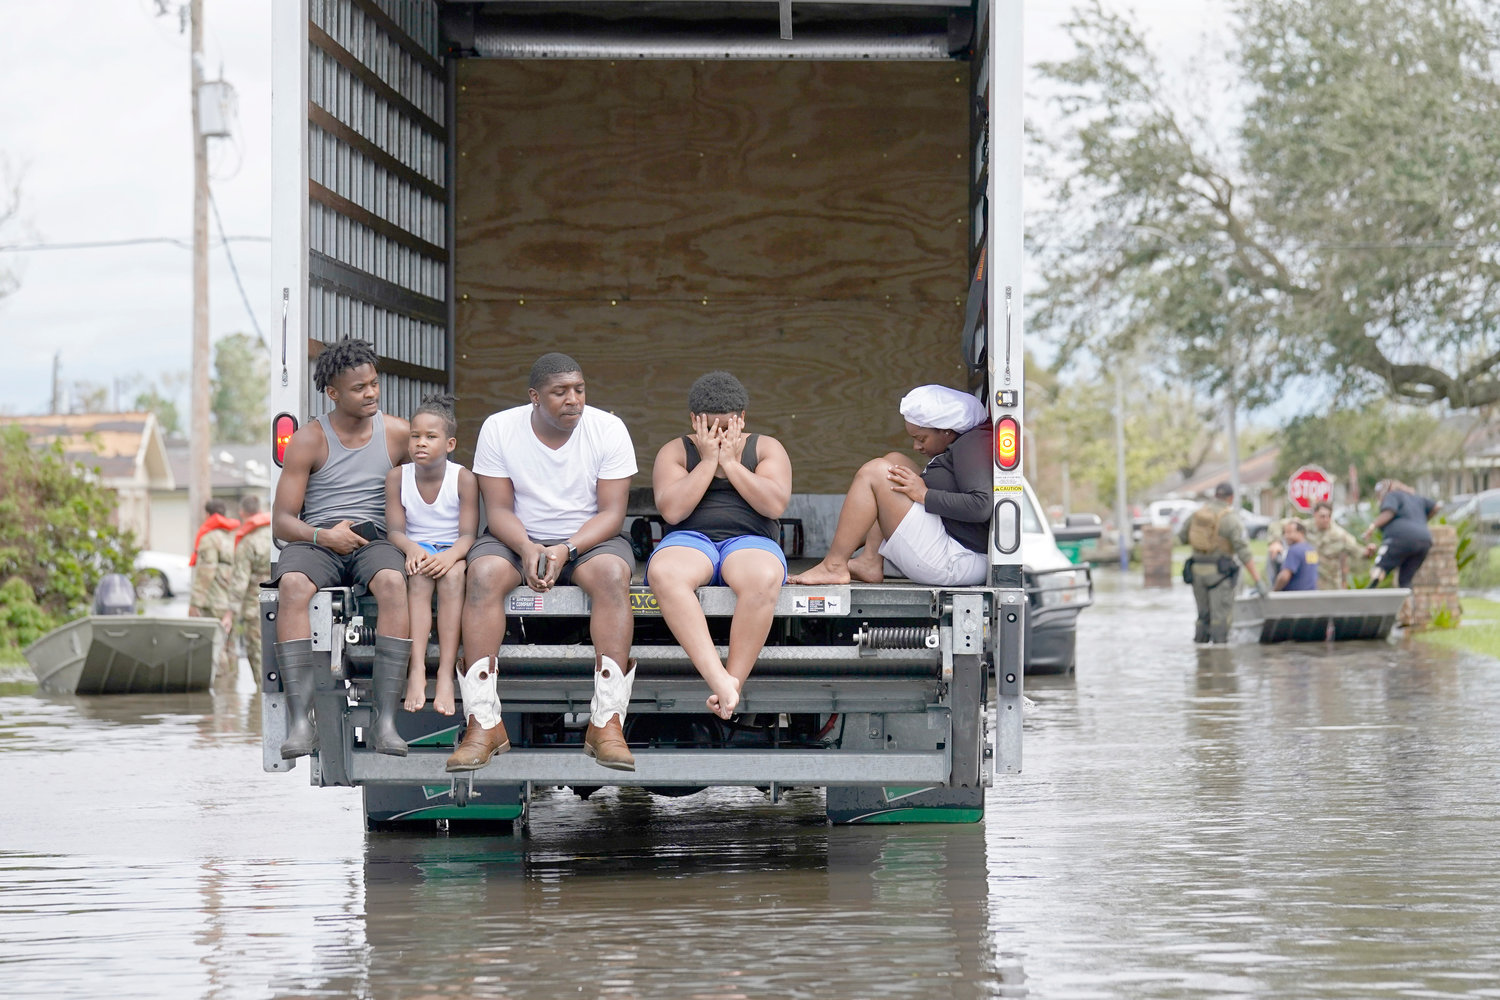 People are evacuated from floodwaters in the aftermath of Hurricane Ida in LaPlace, La., in this August 2021 file photo. 90% of counties in the United States experienced a weather-related disaster between 2011-2021, according to a report published on Wednesday, Nov. 16.